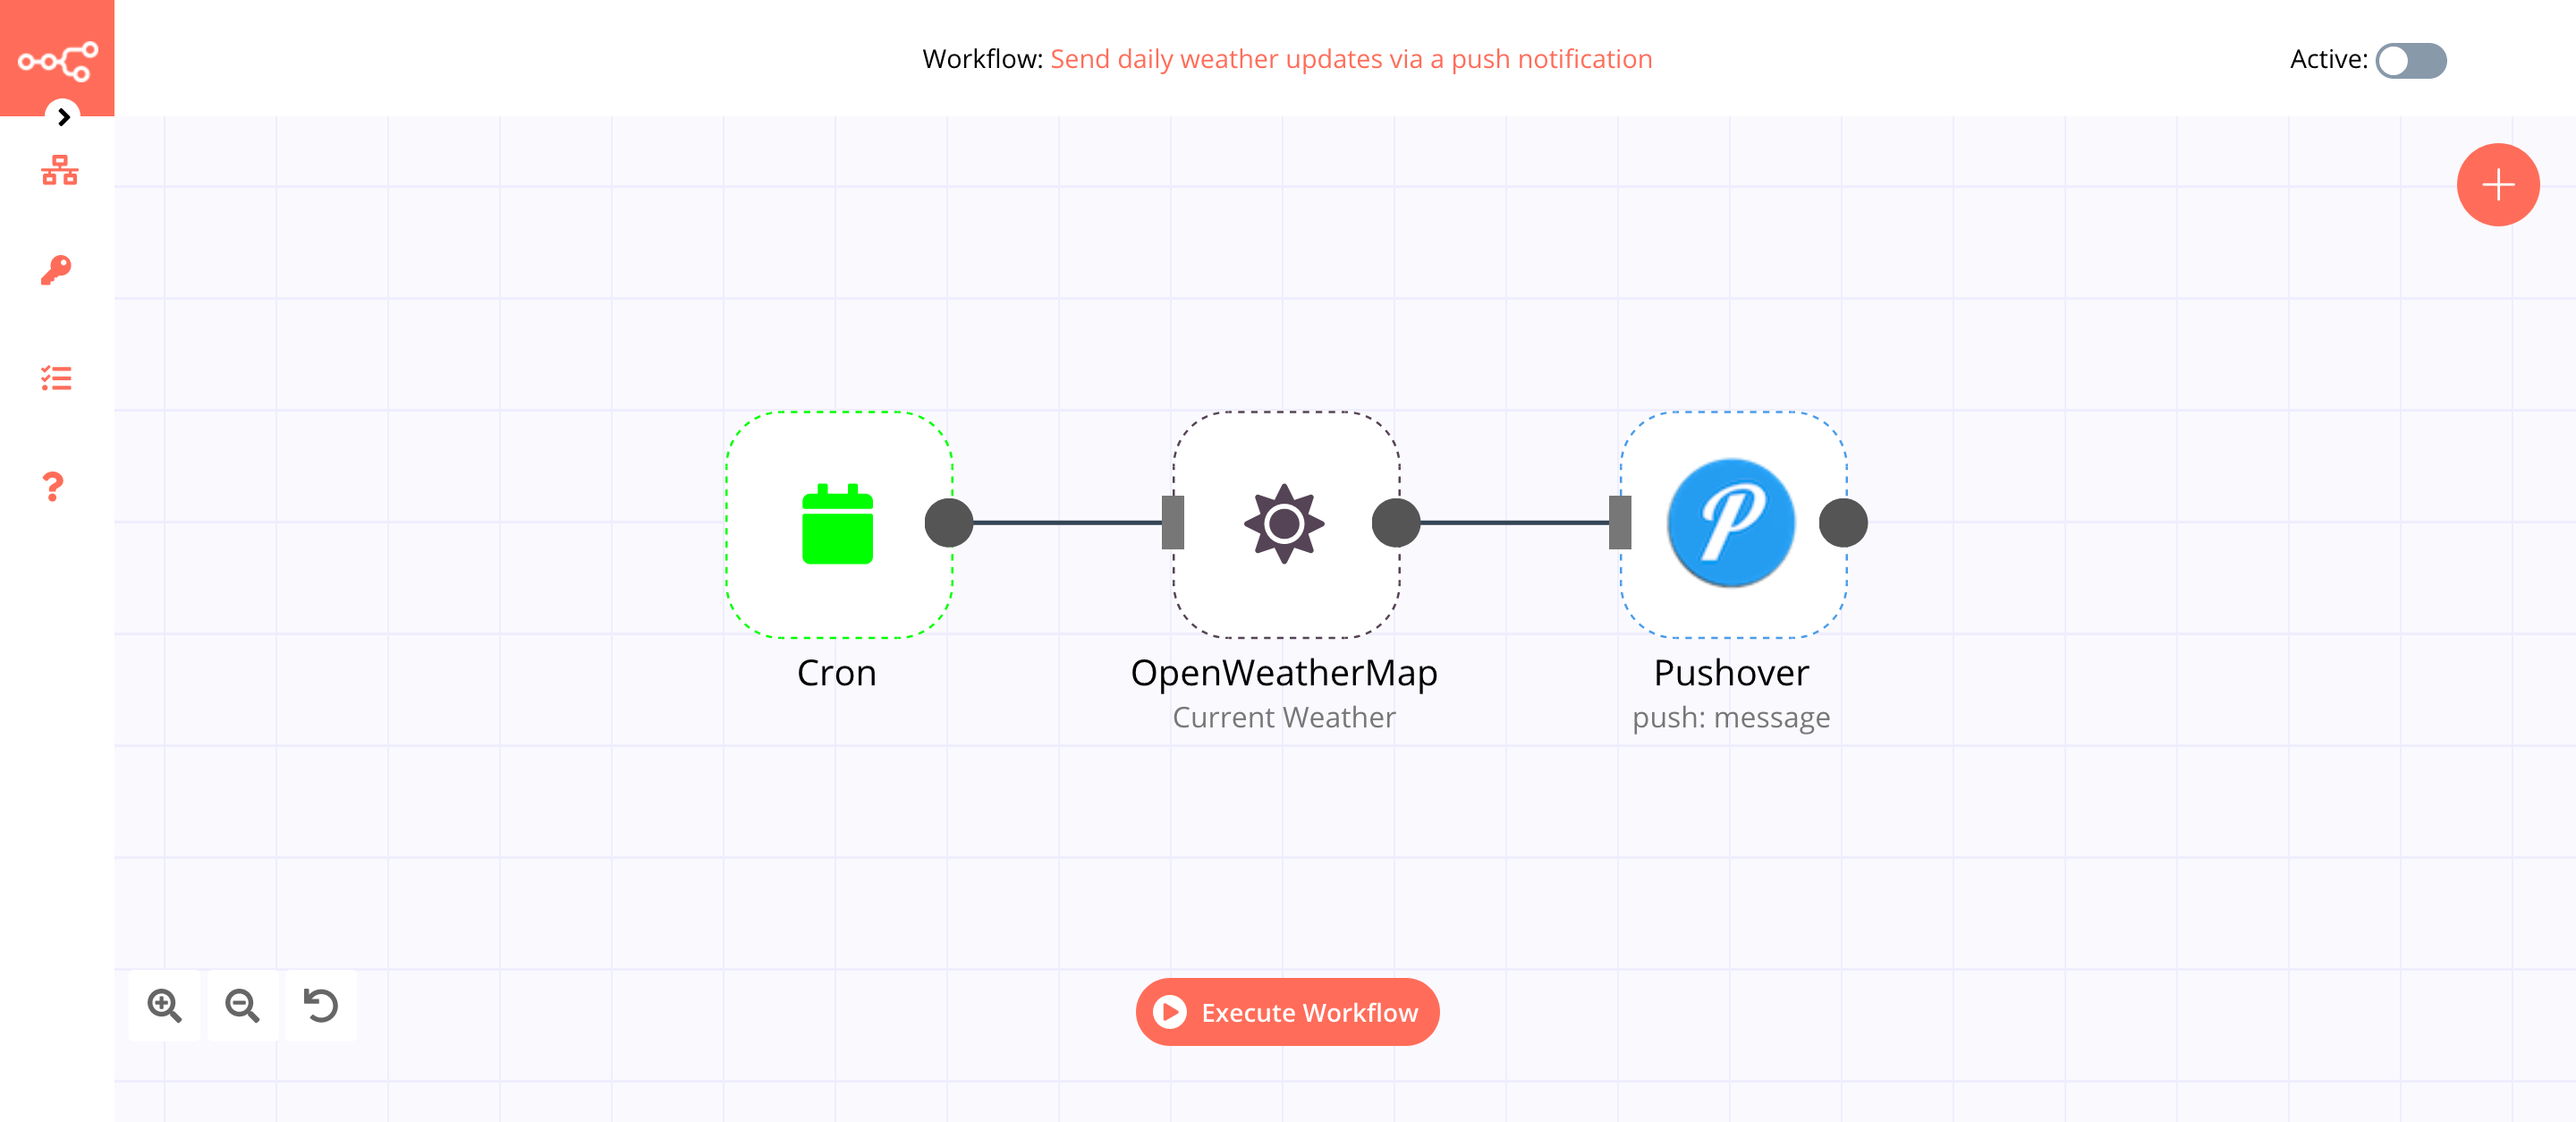 A workflow with the Pushover node